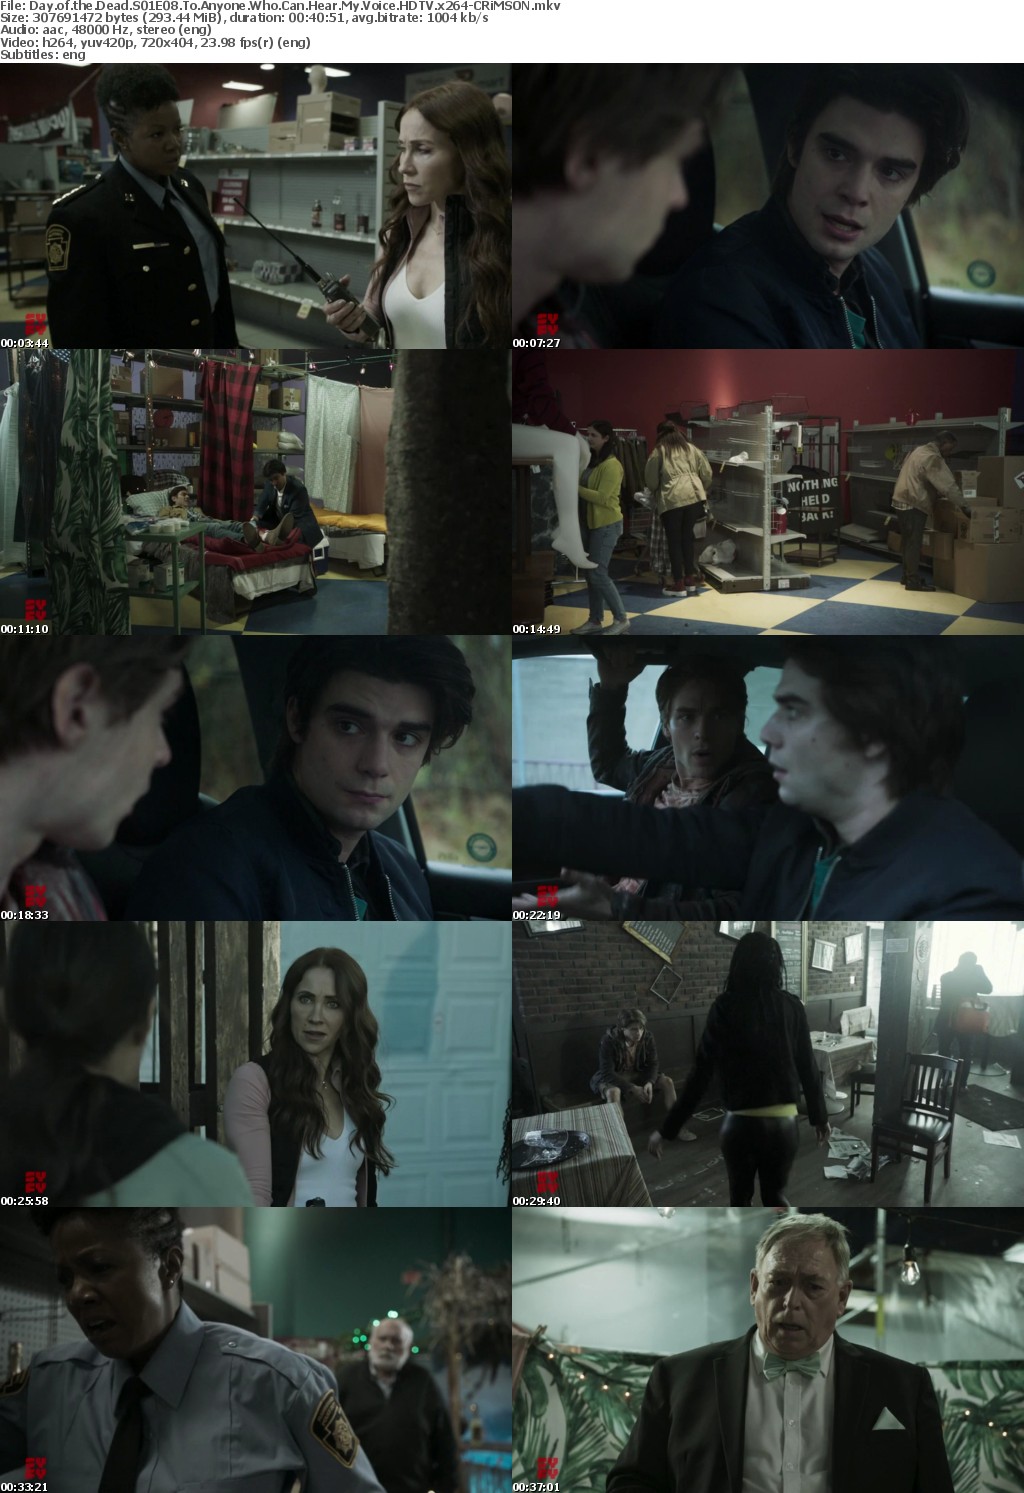 Day of the Dead S01E08 To Anyone Who Can Hear My Voice HDTV x264-CRiMSON